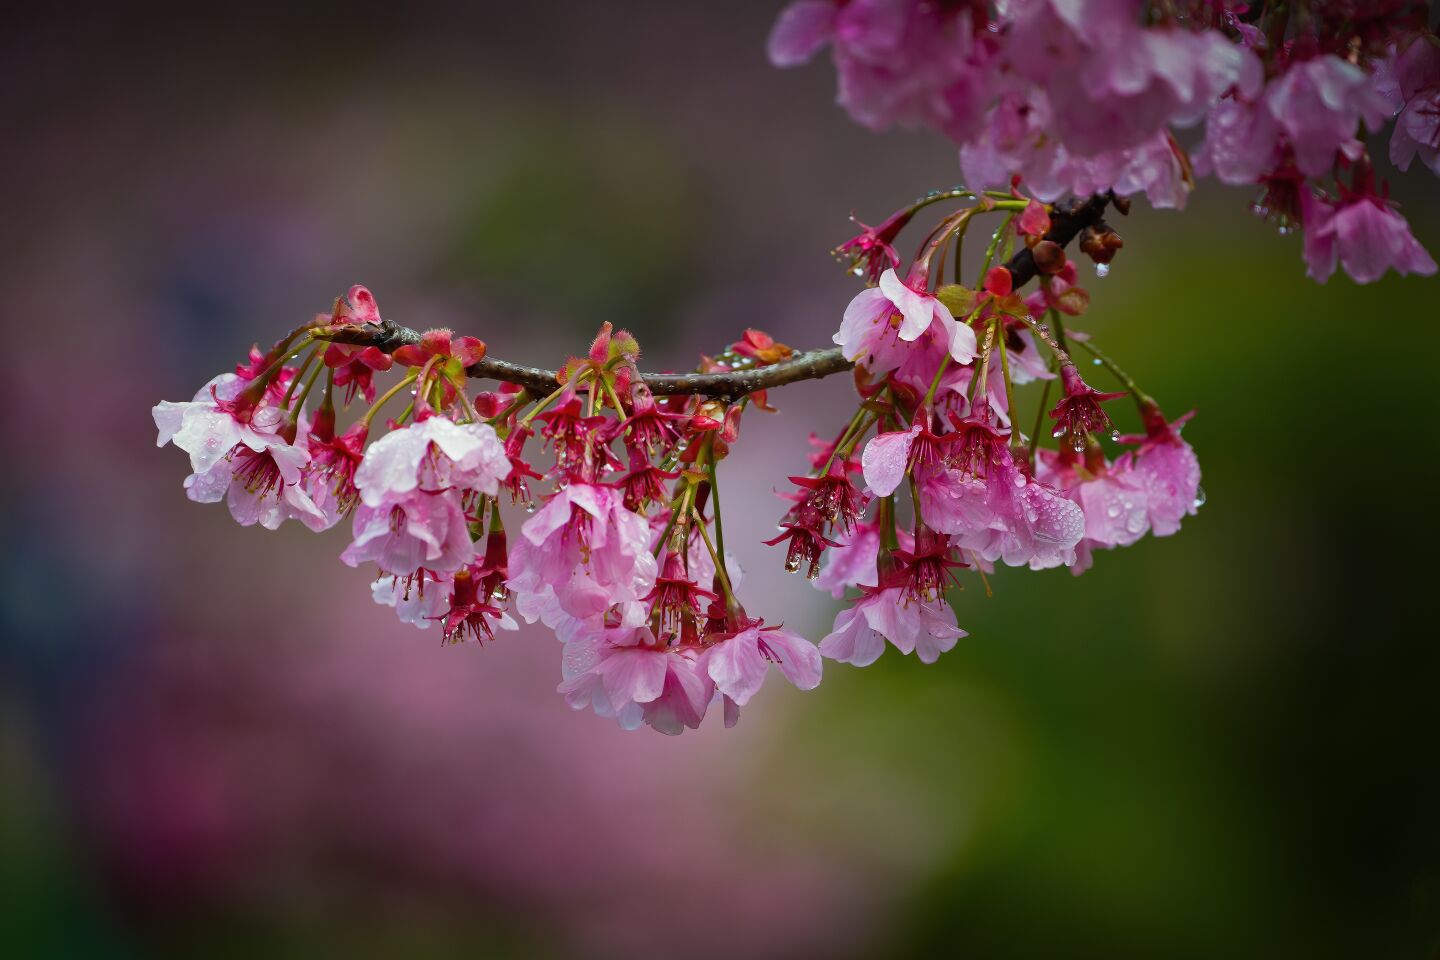 A cherry blossom covered in droplets of rainwater at the Cherry Blossom Festival held at Japanese Friendship Garden on Saturday, March 11, 2023 in San Diego, CA.